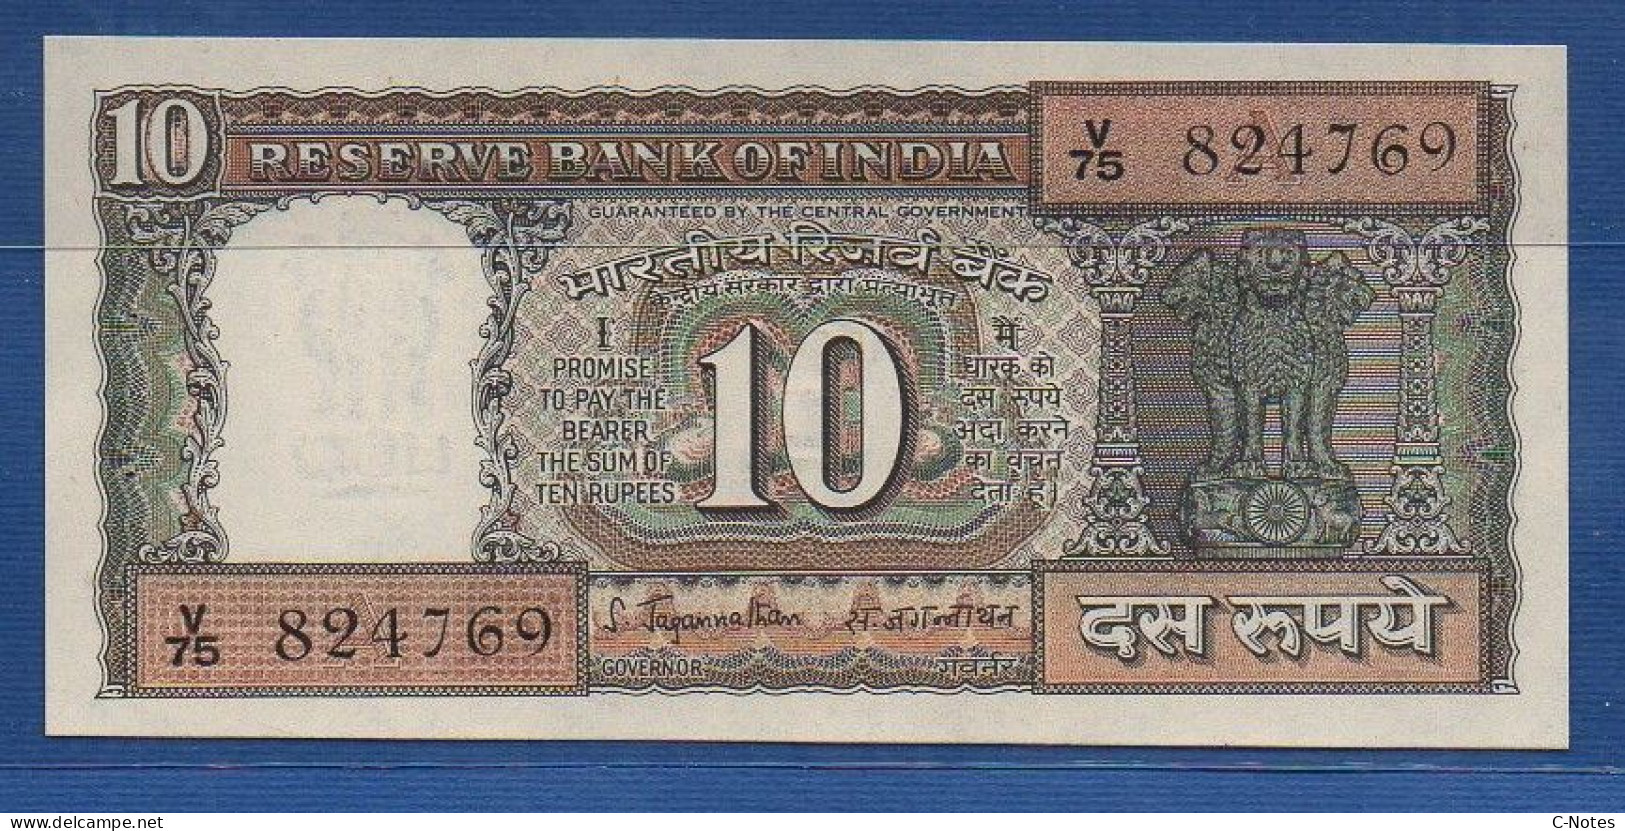 INDIA - P. 60a – 10 Rupees ND, UNC-,  Serie V75 824769 - Plate Letter A Signature: S. Jagannathan (1970) - Inde